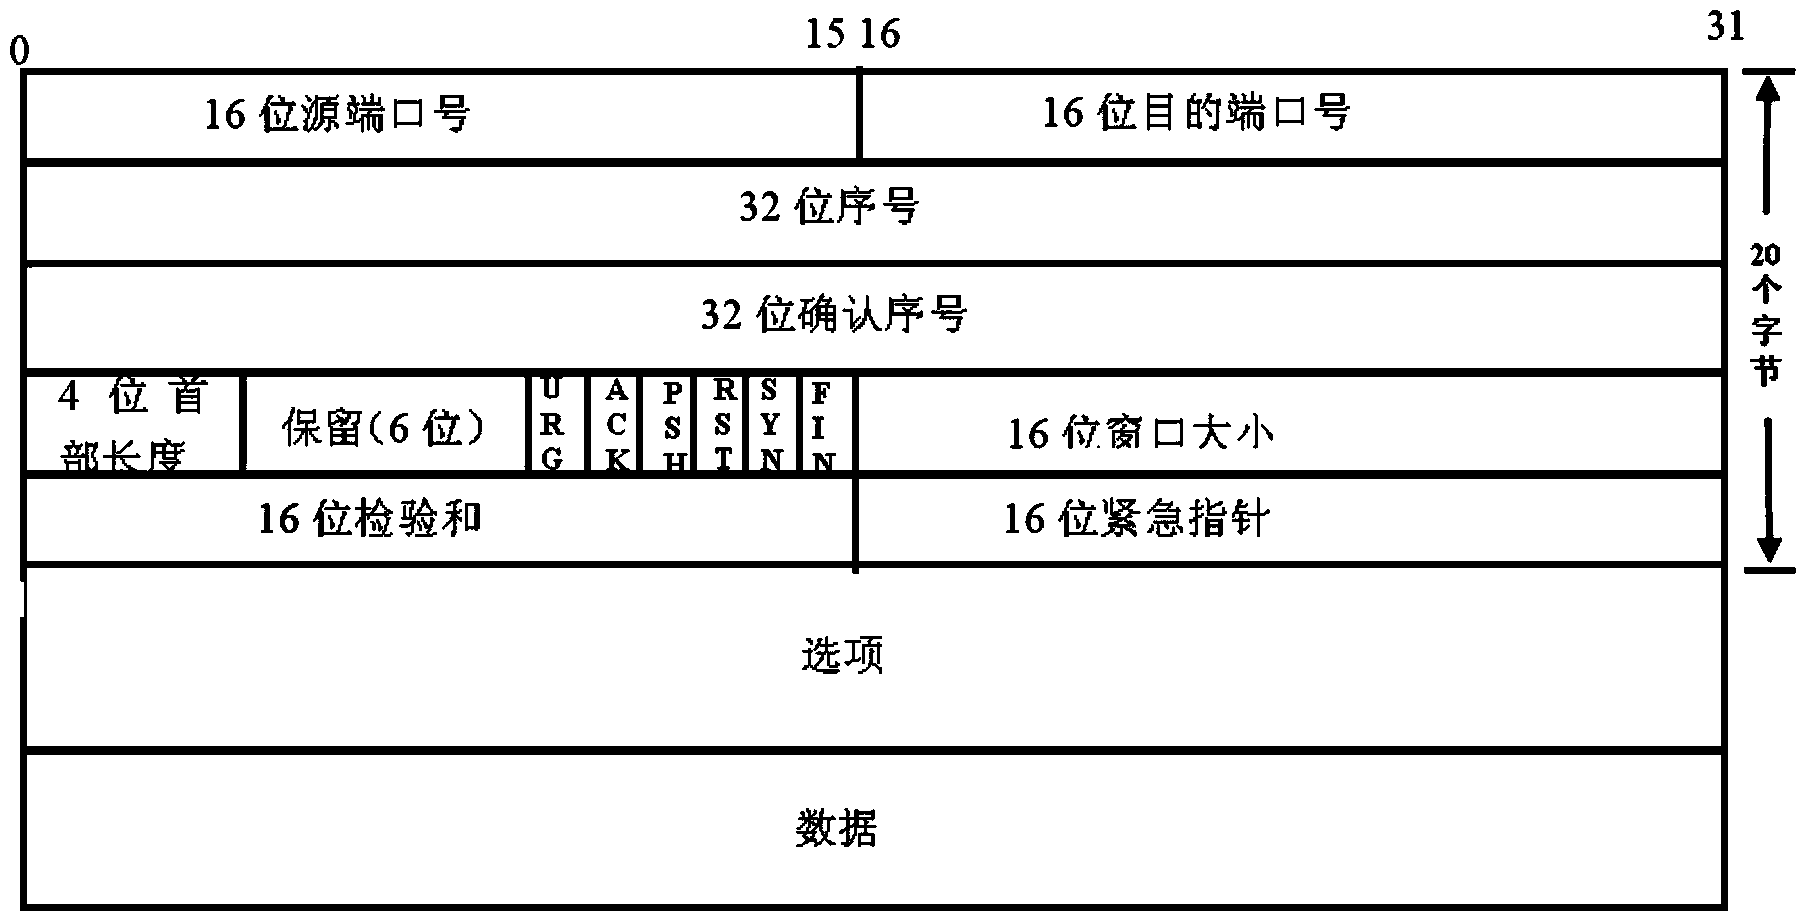 Method for verifying TCP (transmission control protocol) connection security